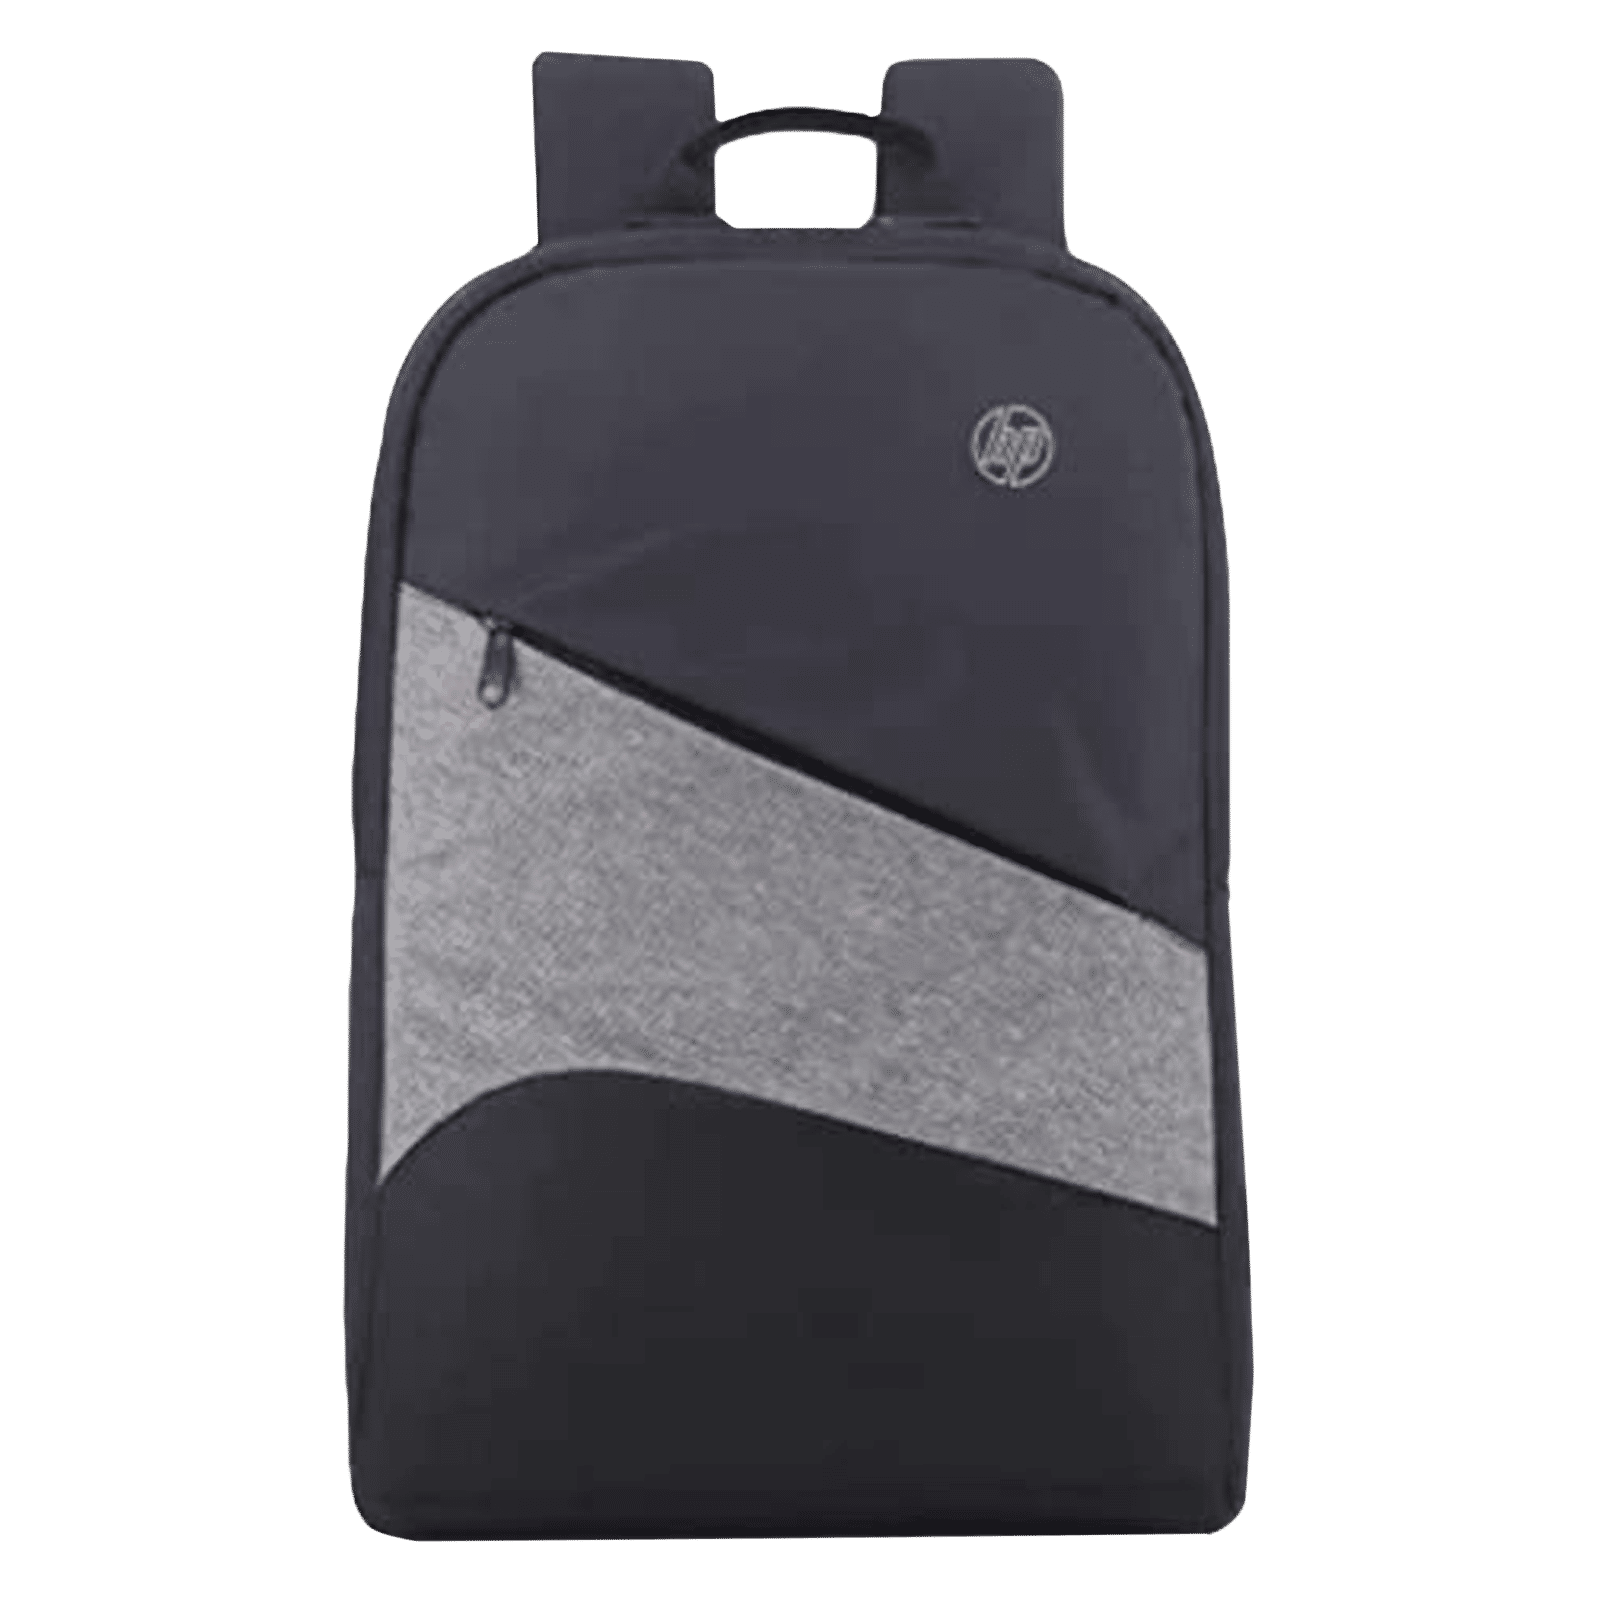 156 Inch Hp laptop bags Capacity 20 Litre